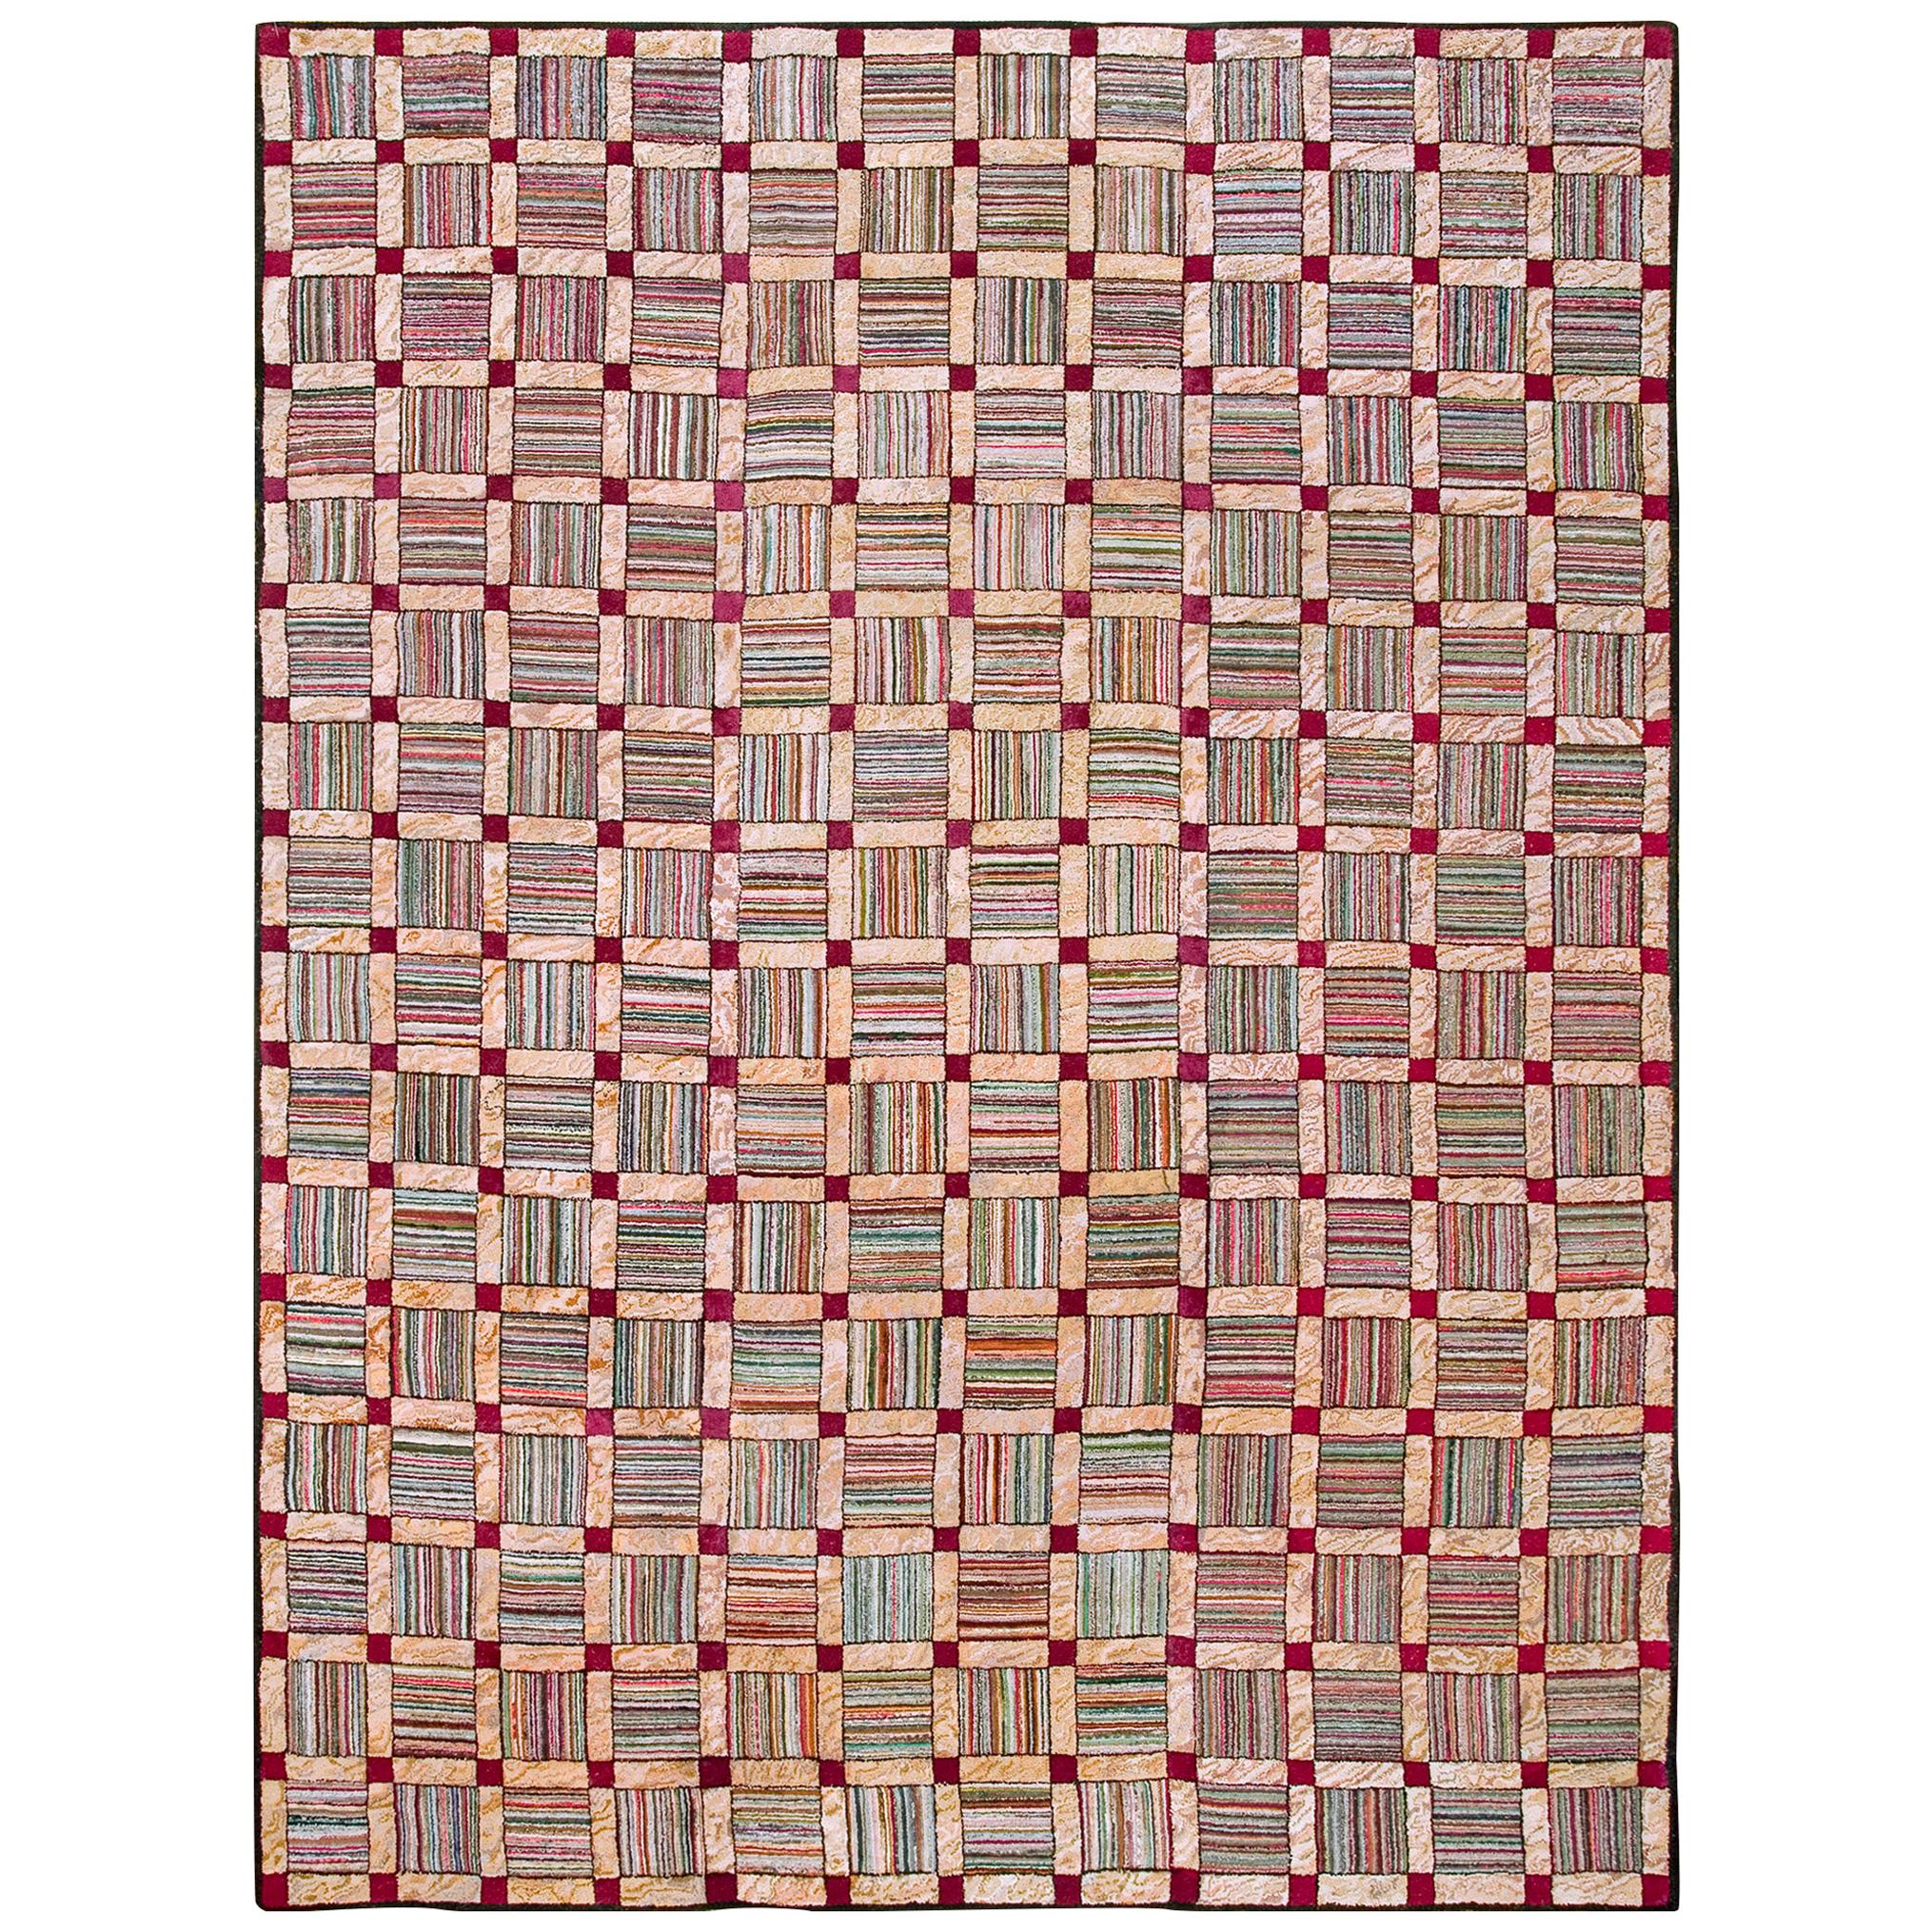 1930s American Hooked Rug ( 9'3" x 12'4" - 282 x 376 )